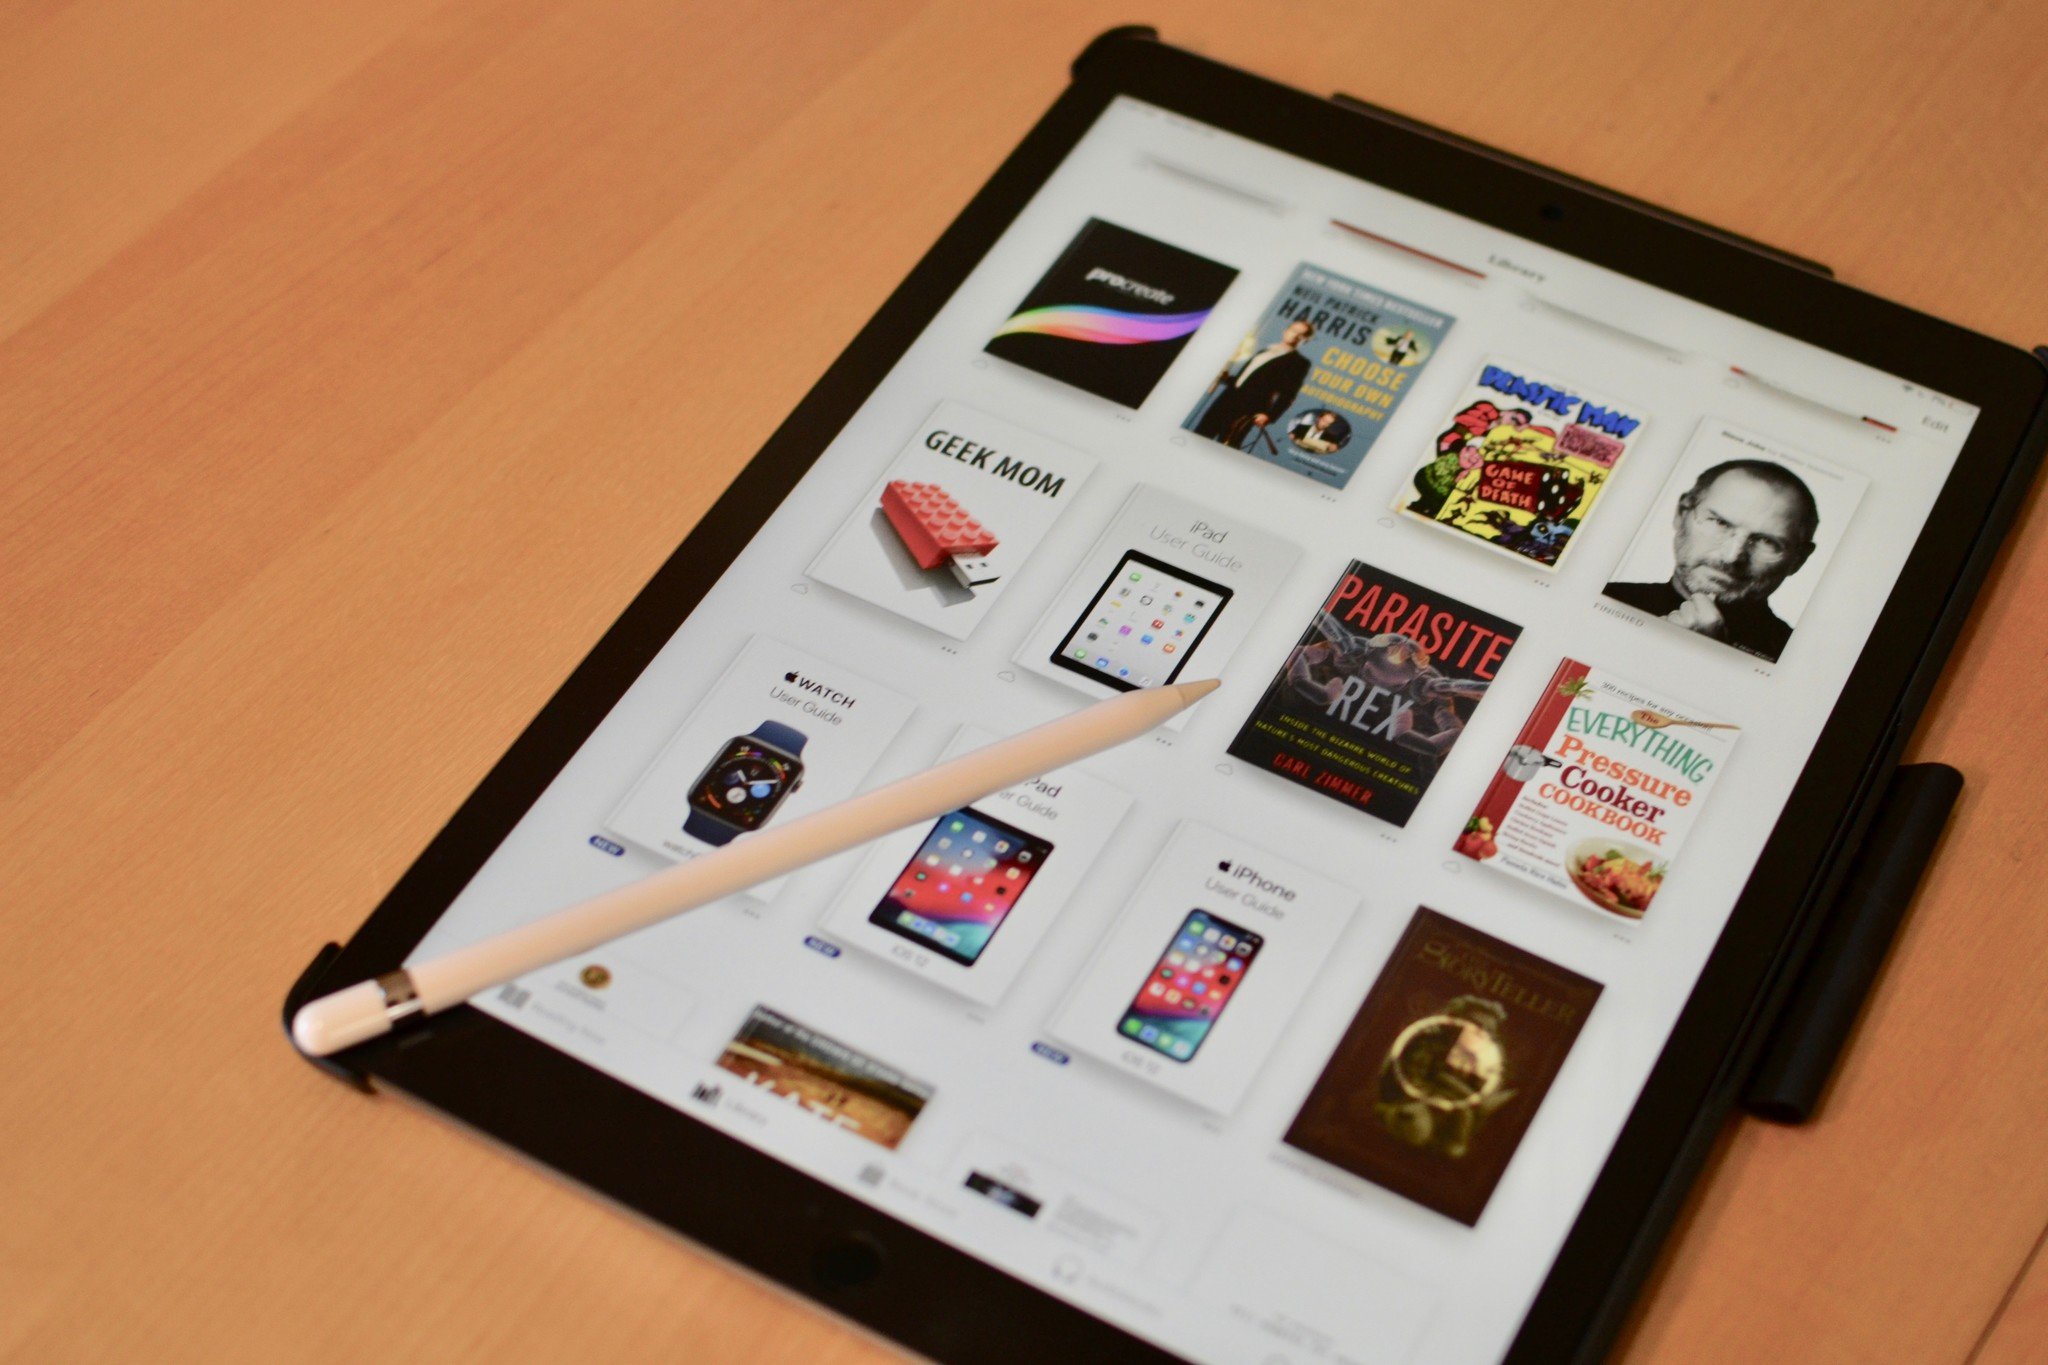 How To Sync Books To Your IPad